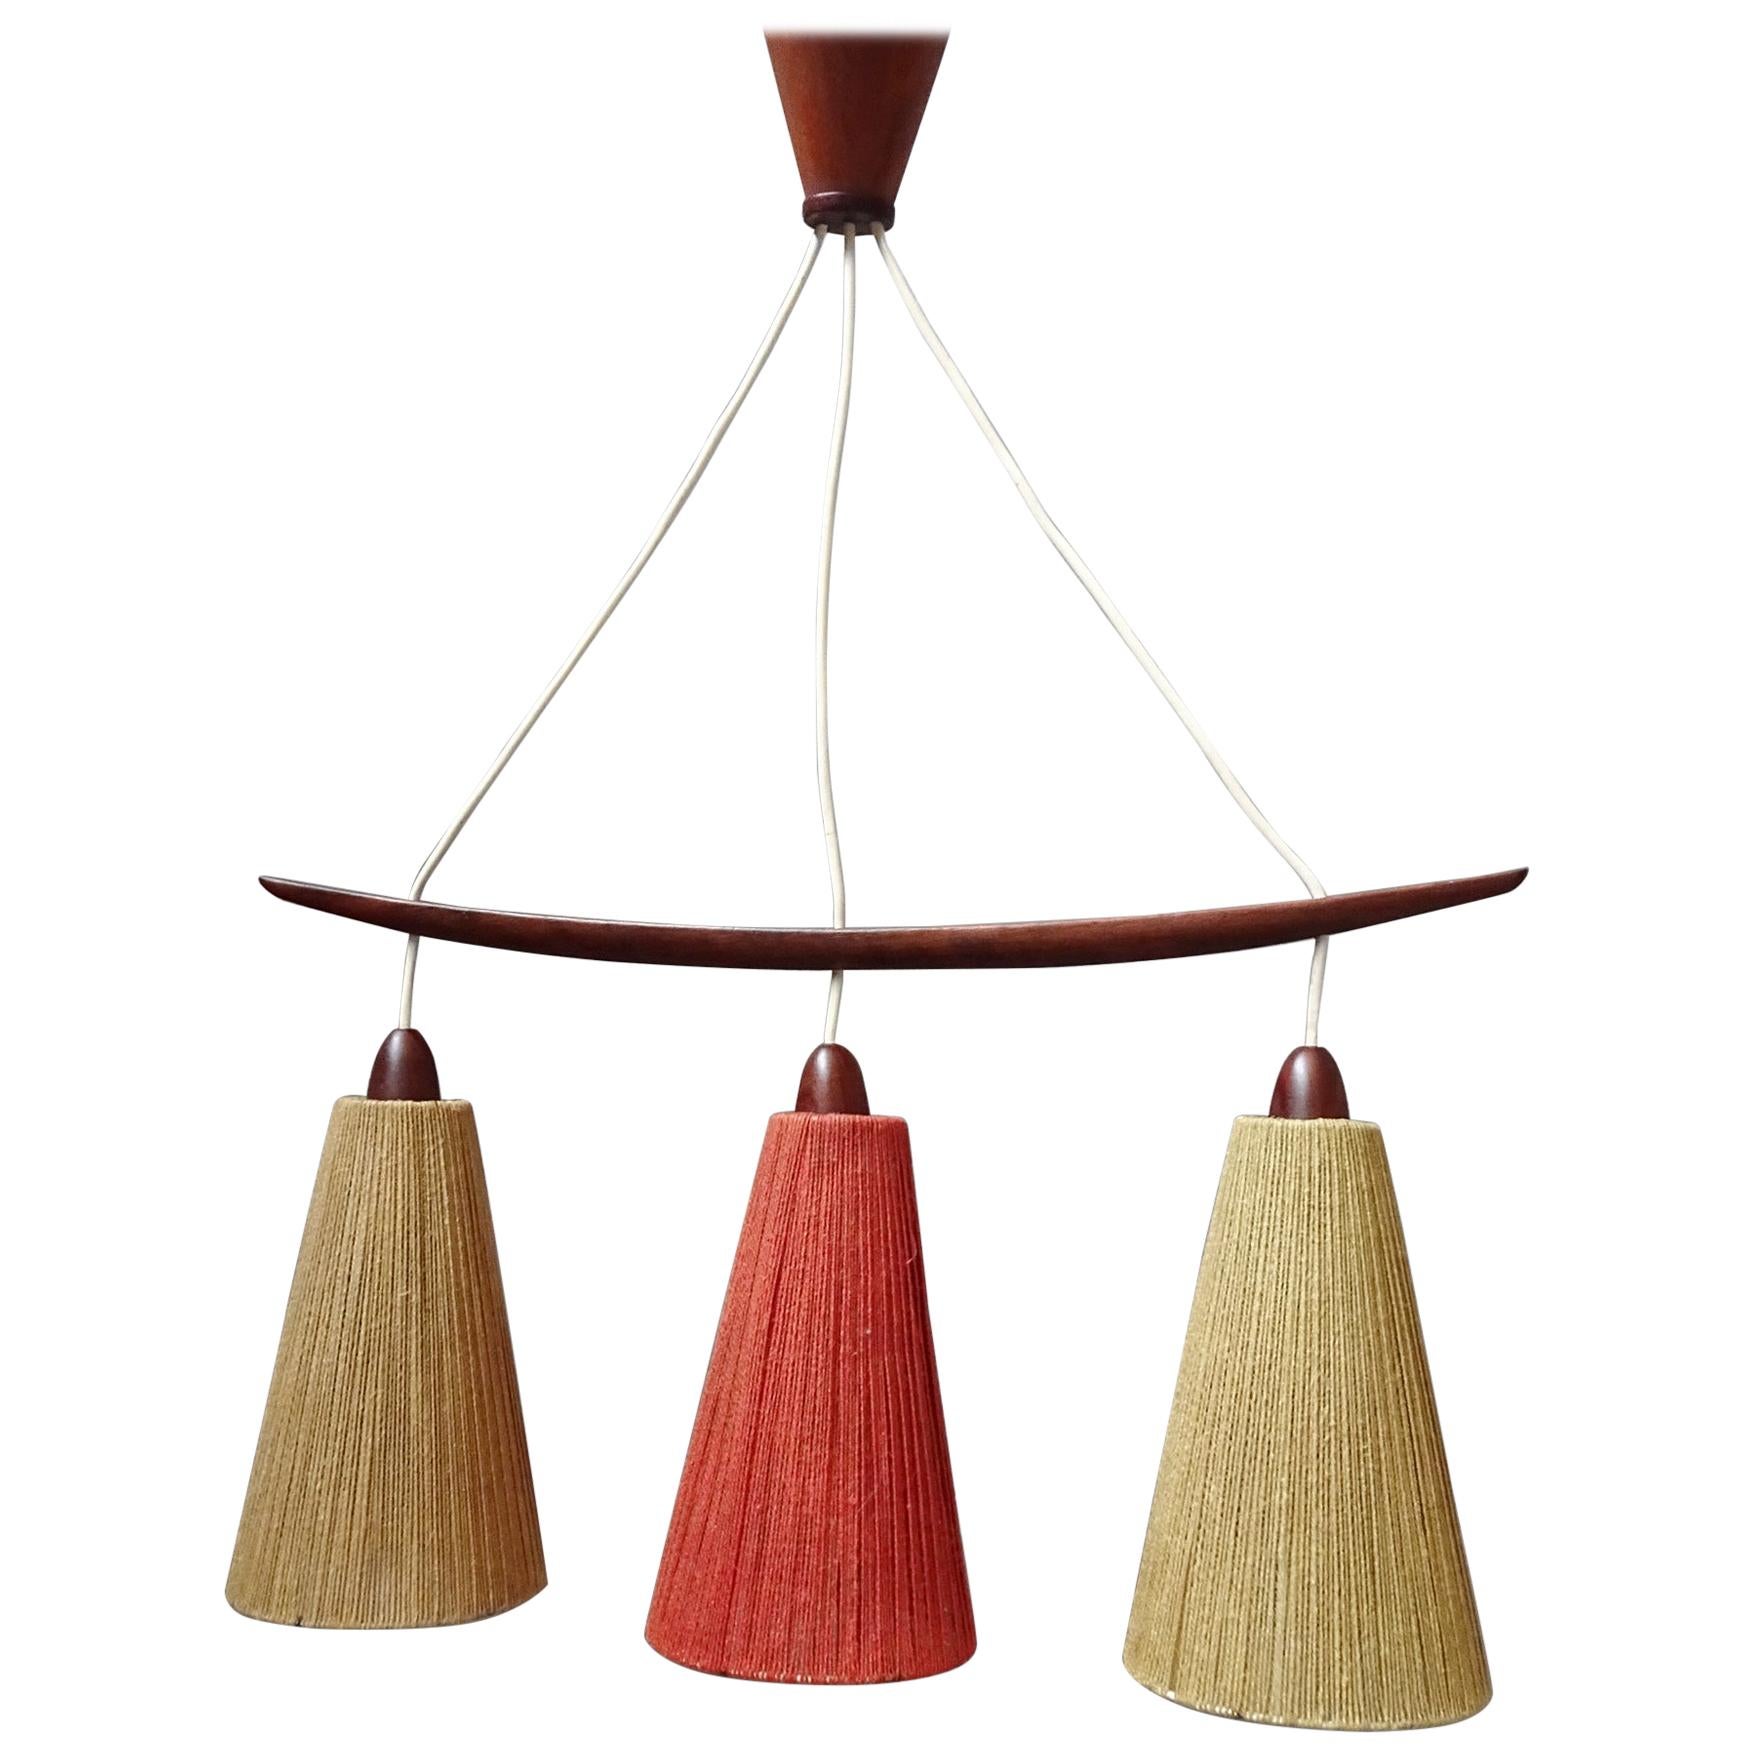 Midcentury Teak and Cord Shade Chandelier by Temde, Germany, 1960